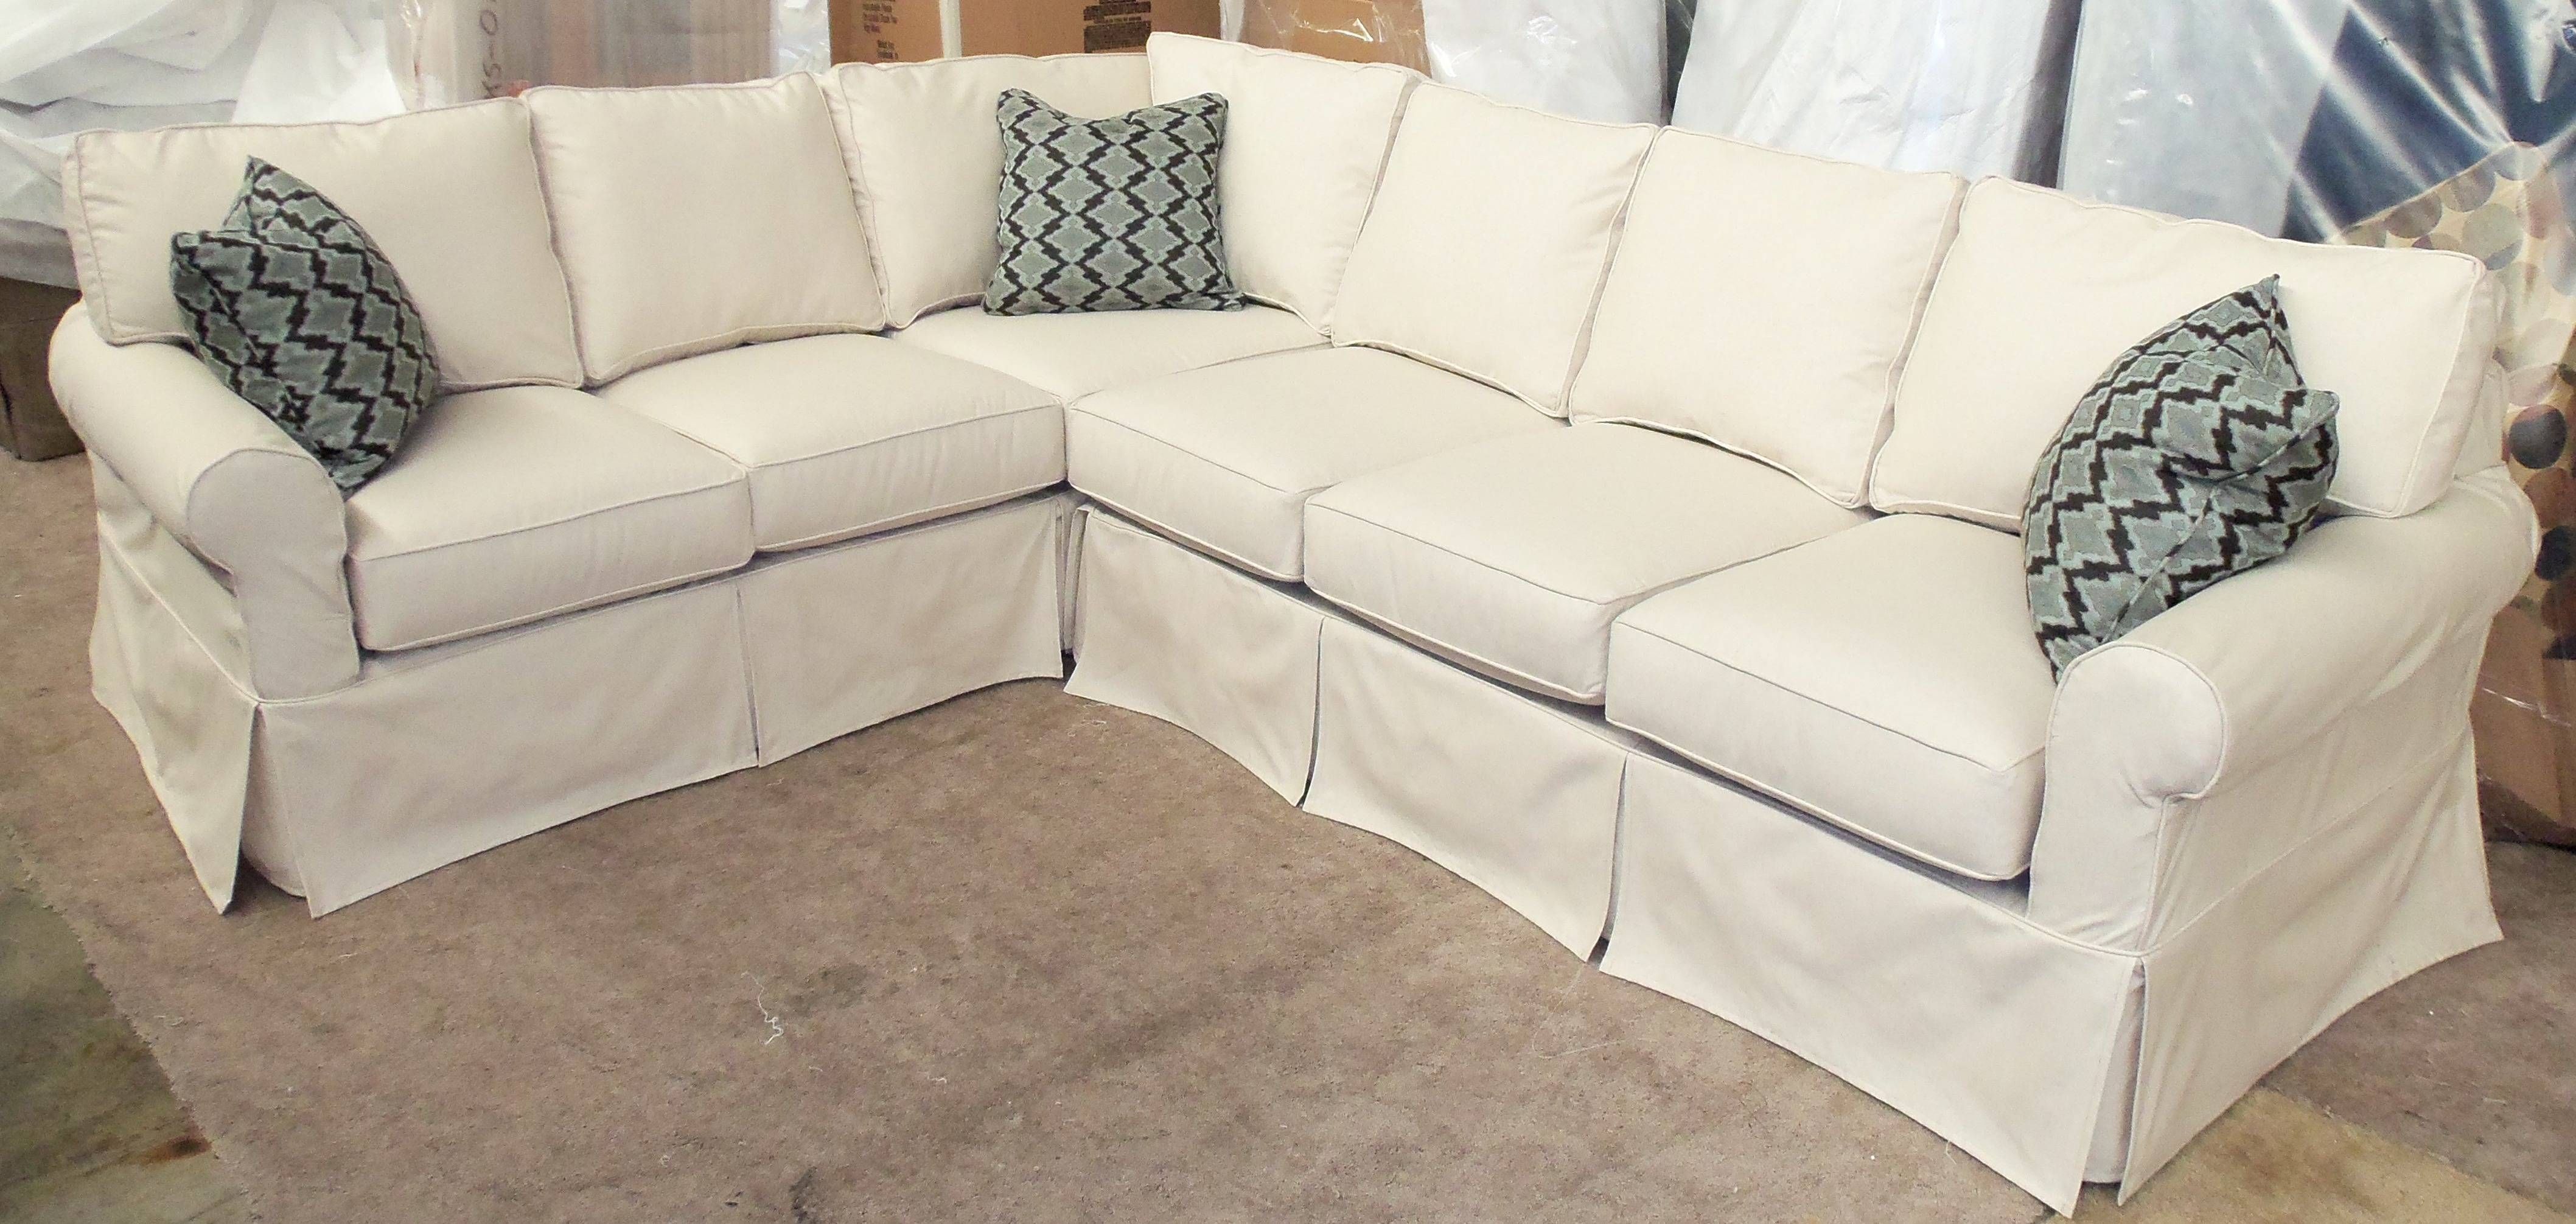 E296bb Sofa 10 Lovely Sofa Covers For Sectionals Sectional Couch Within Sectional Sofa Covers 